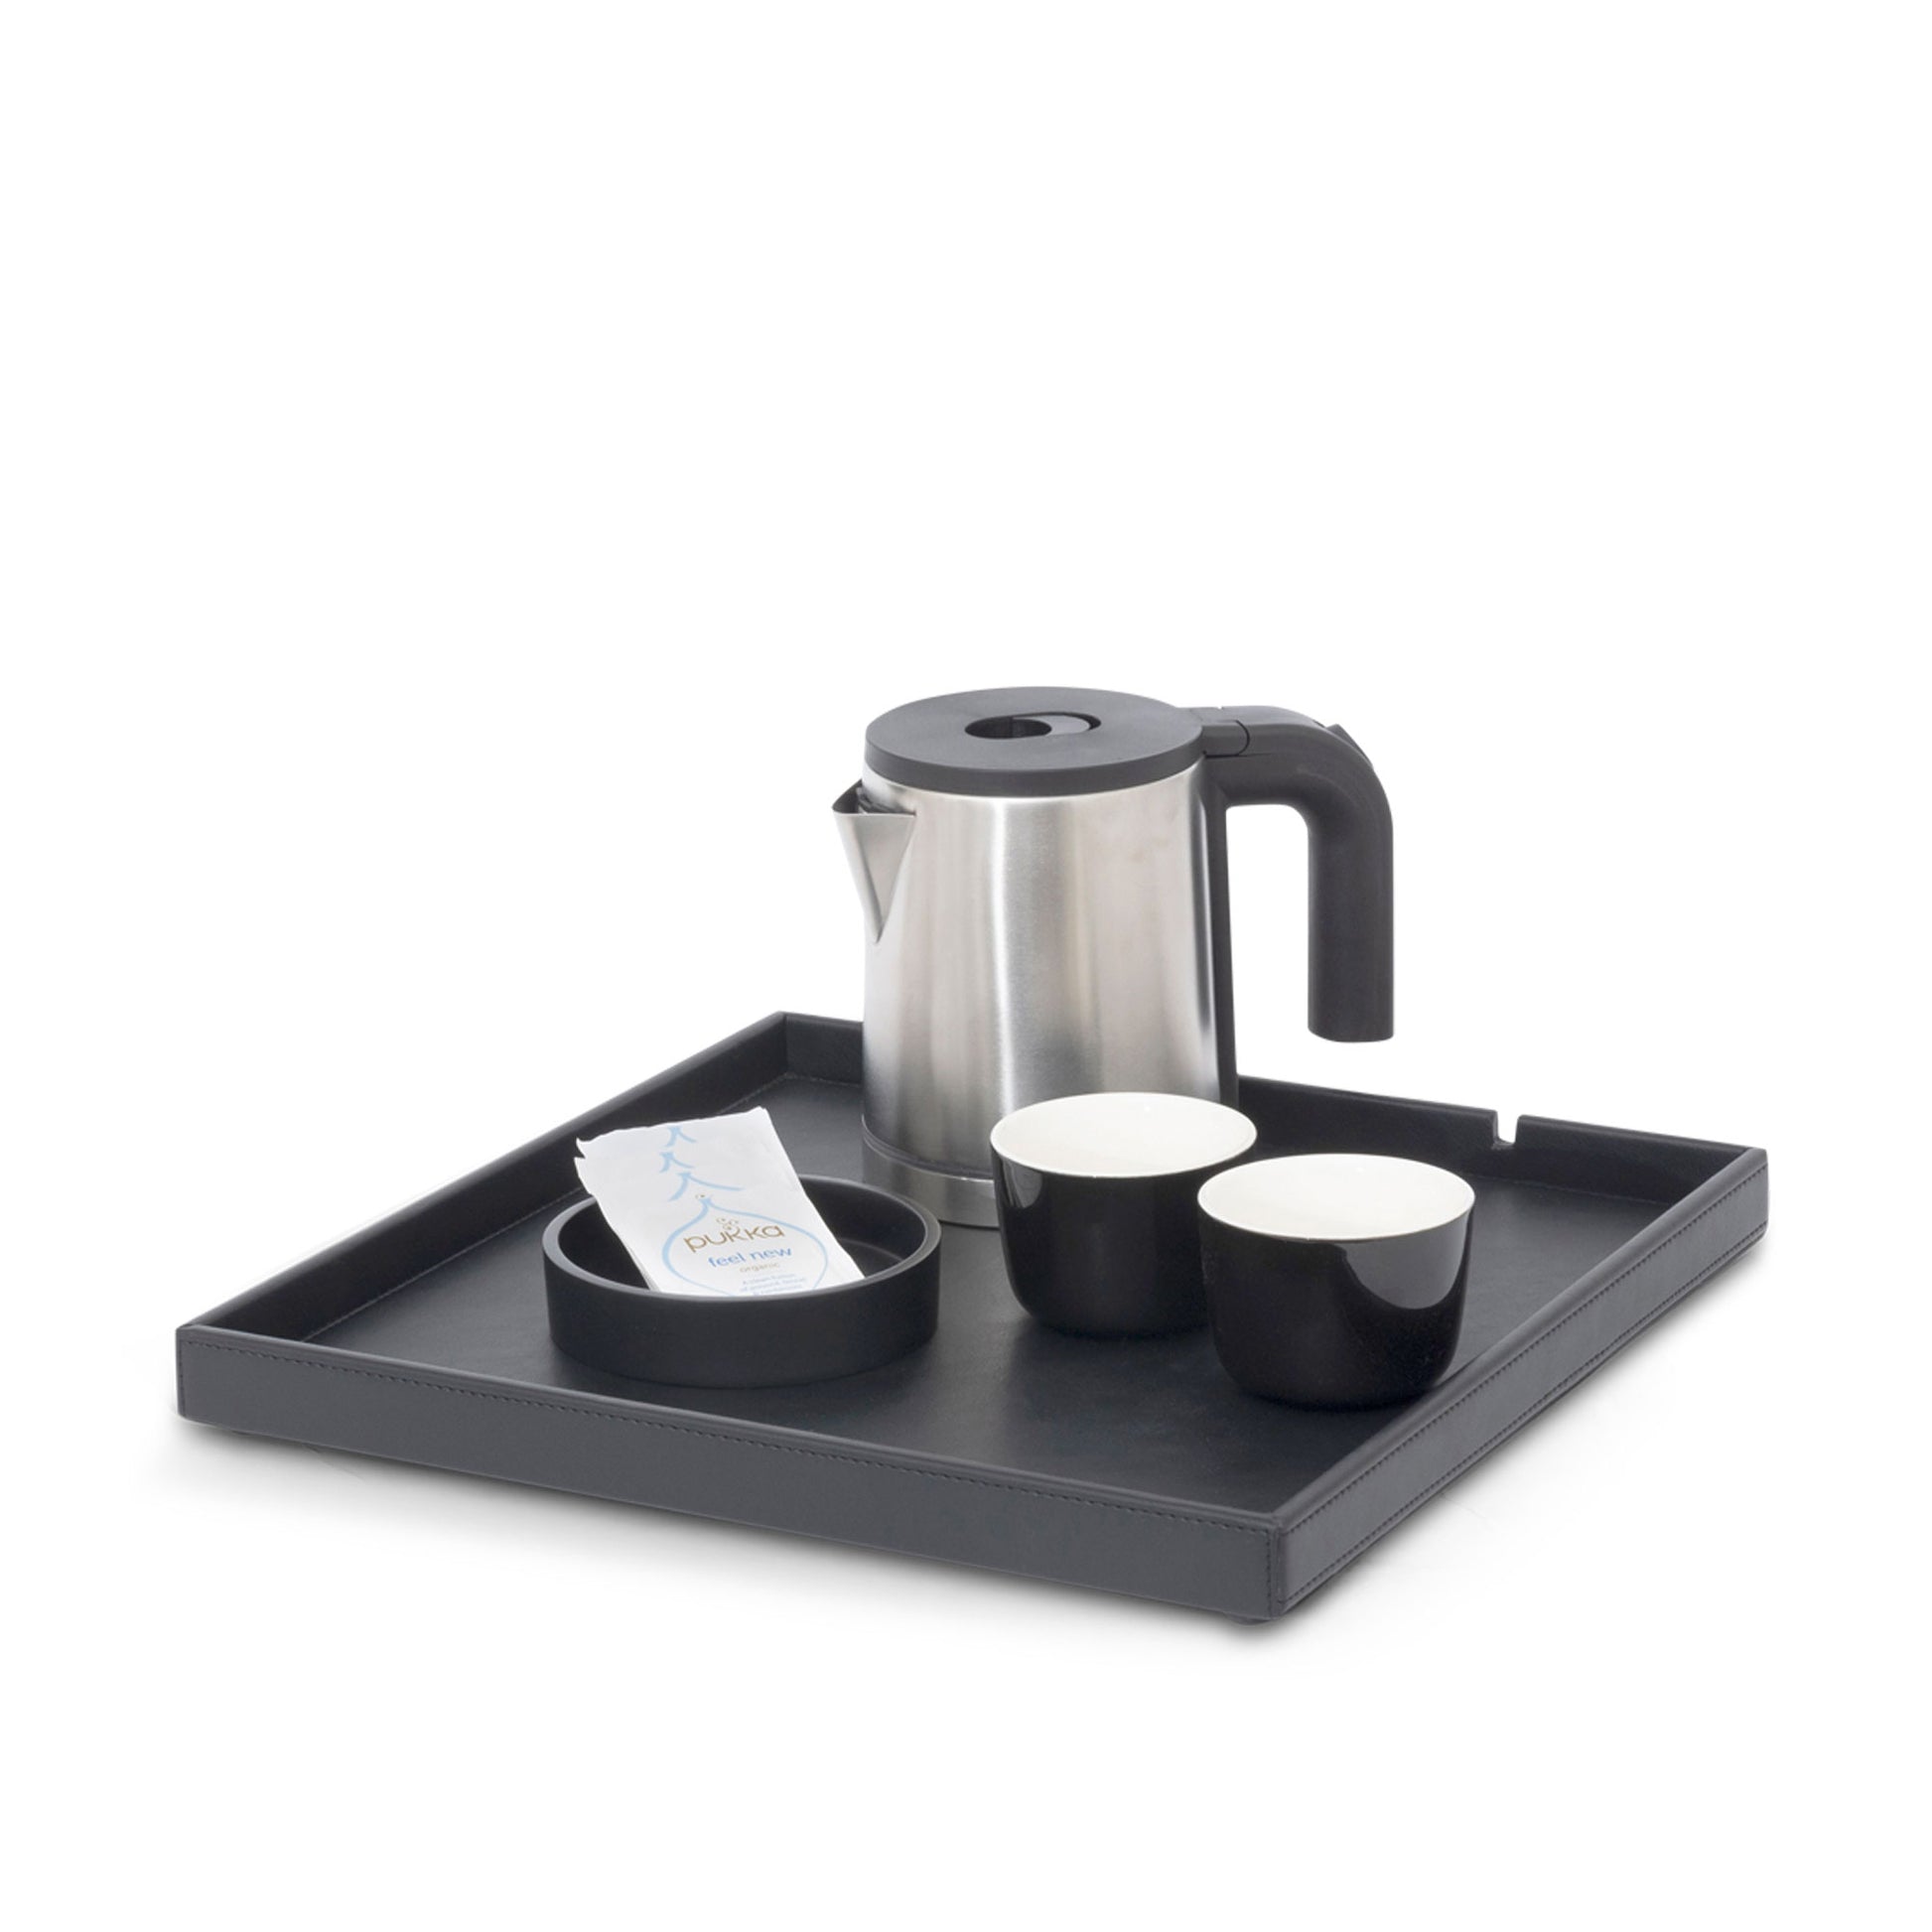 Bentley Fuji kettle tray in black leather with kettle and condiment tray